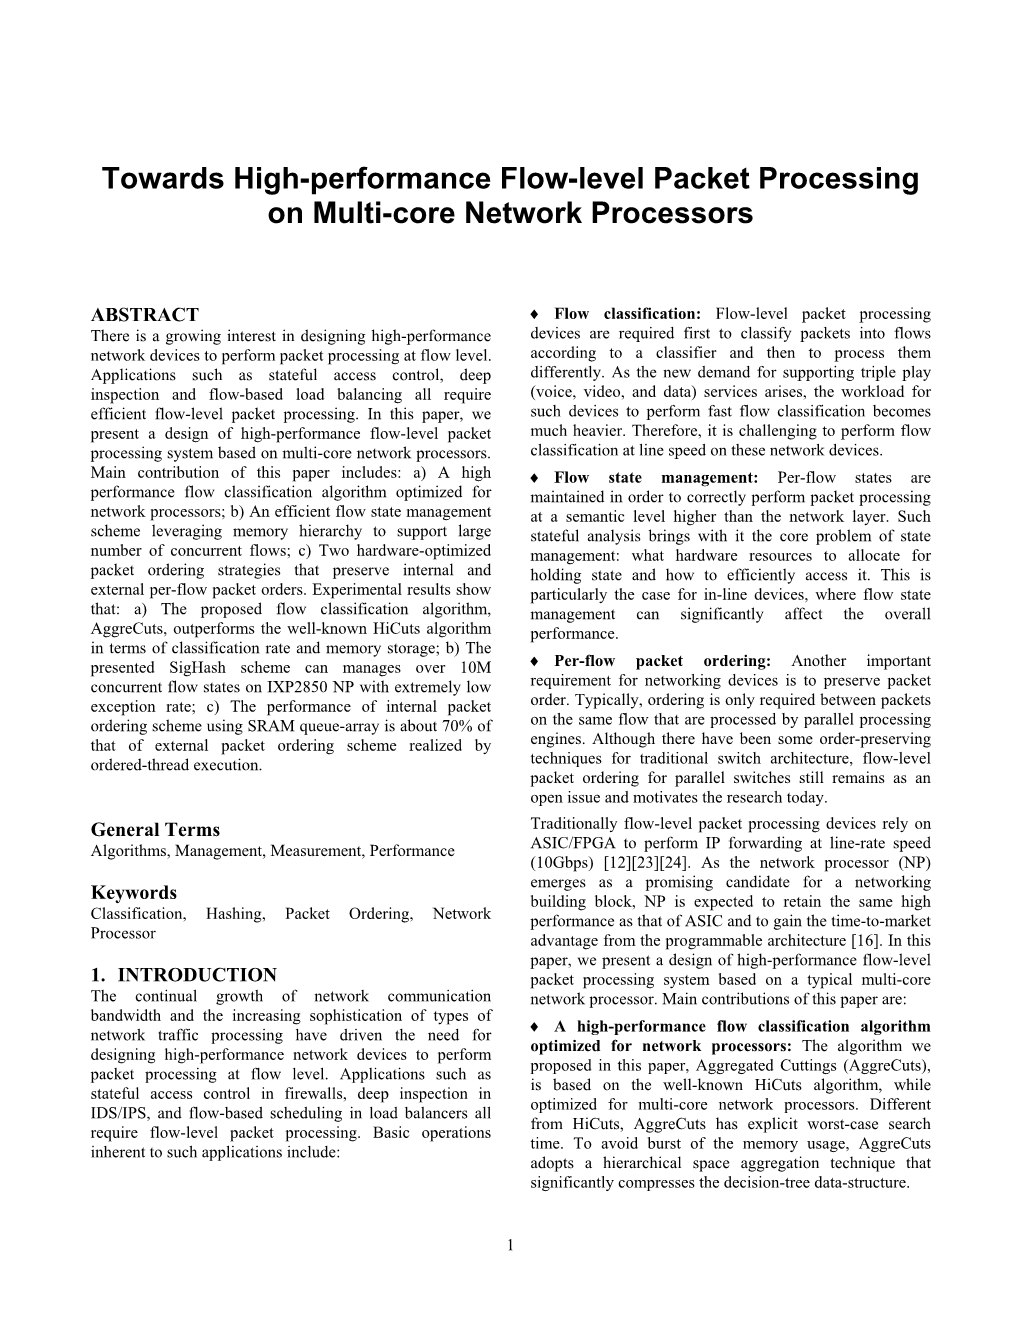 Towards High-Performance Flow-Level Packet Processing on Multi-Core Network Processors